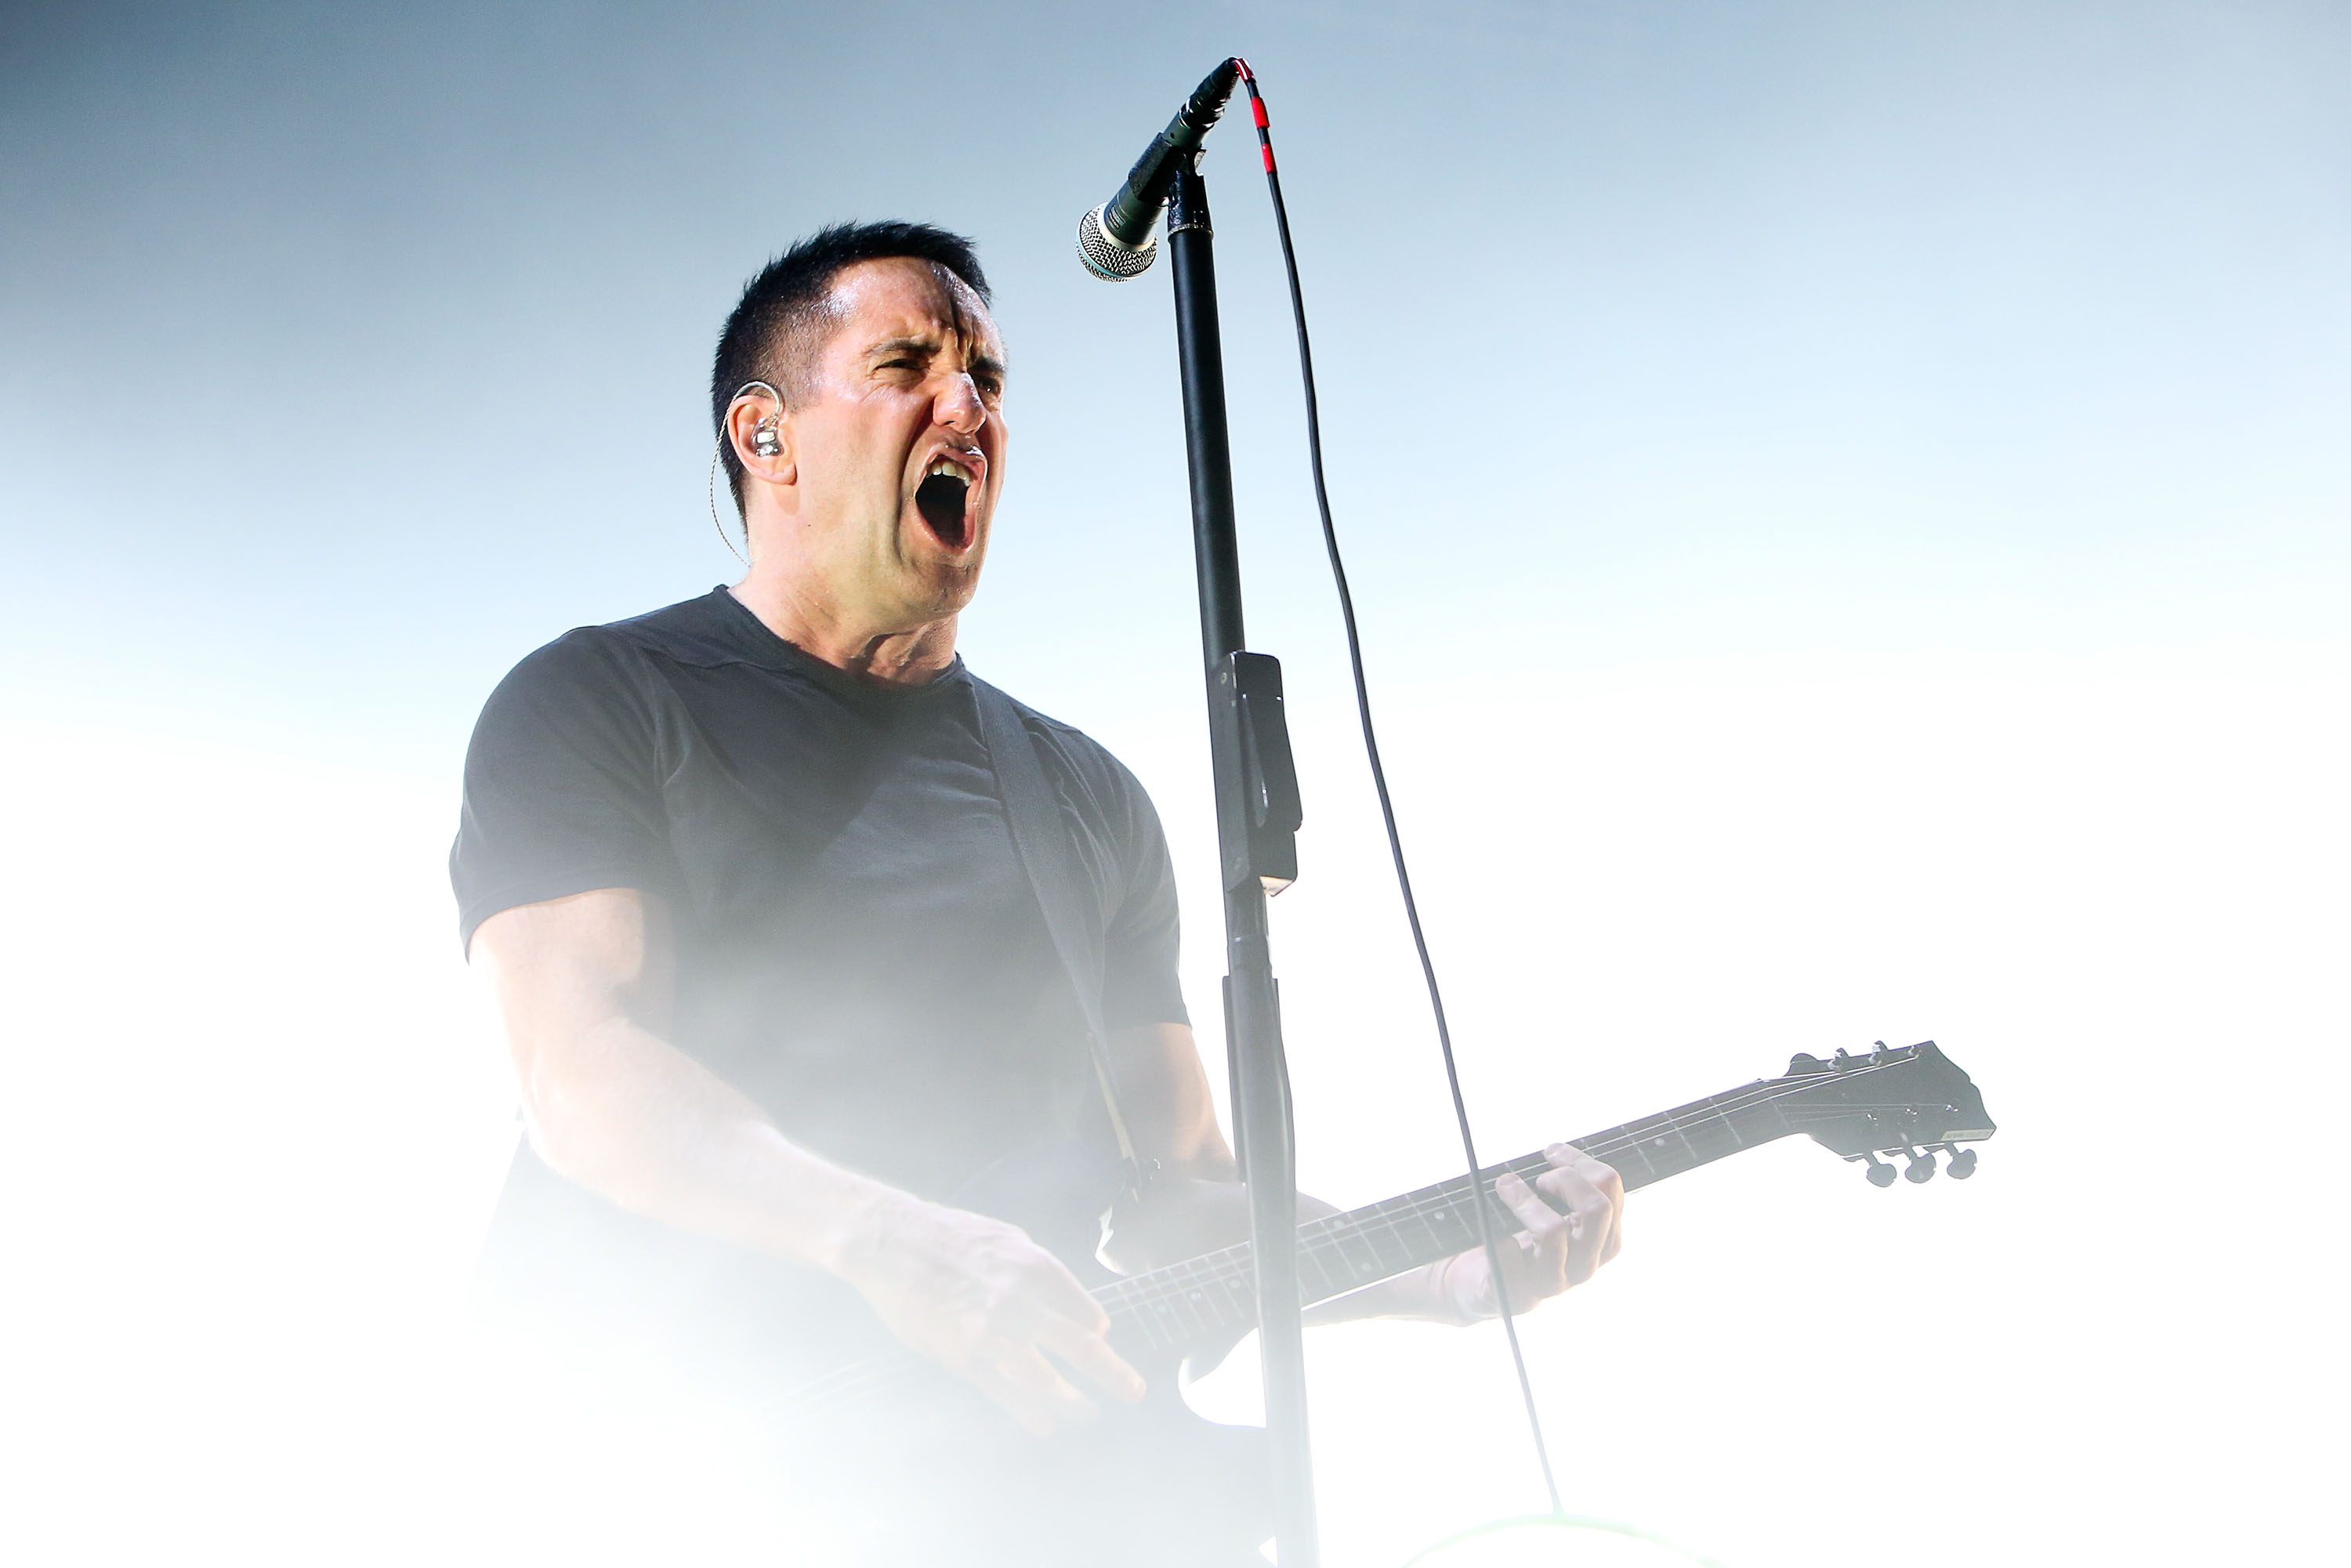 How to get Nine Inch Nails tickets for 2022 tour